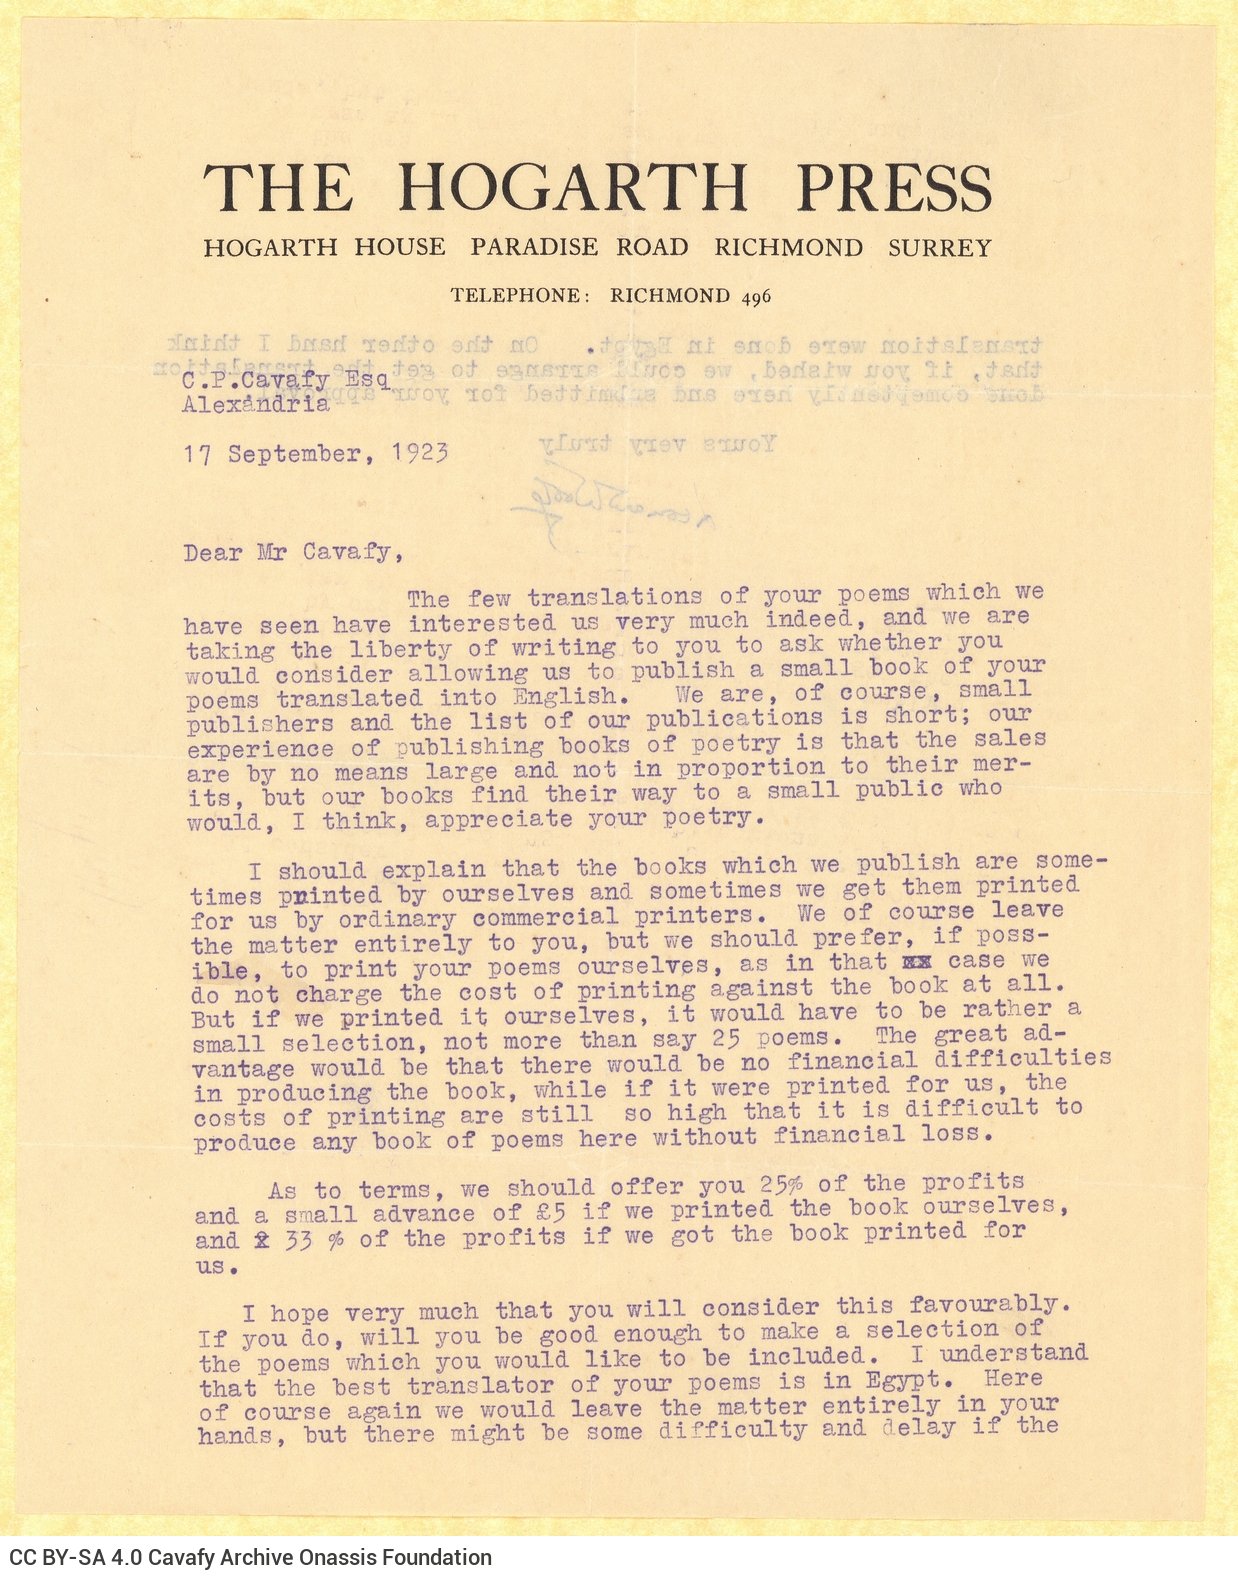 Autograph typewritten letter by Leonard Woolf on both sides of a letterhead of The Hogarth Press. He informs Cavafy of their 